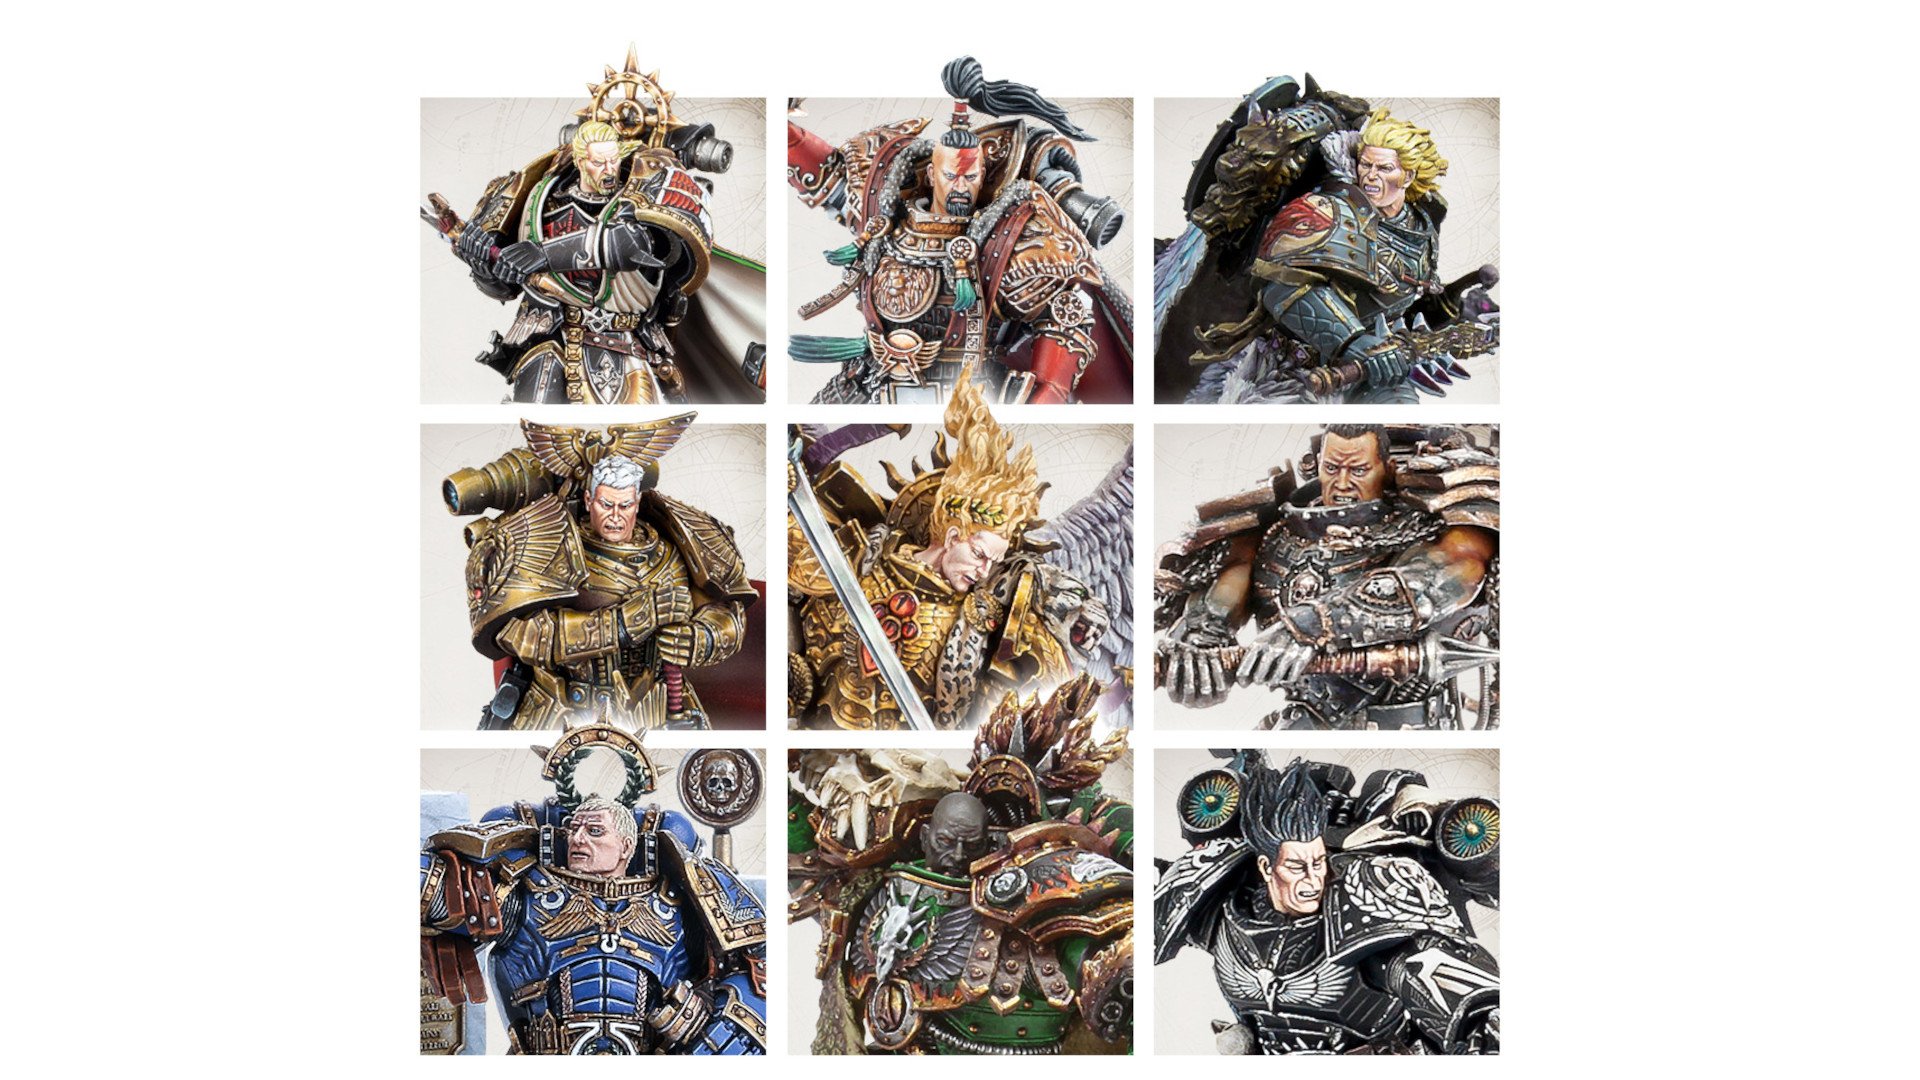 Warhammer 40k primarchs guide - Games Workshop image showing profiles of the nine loyalist primarch models made in Forge World Resin